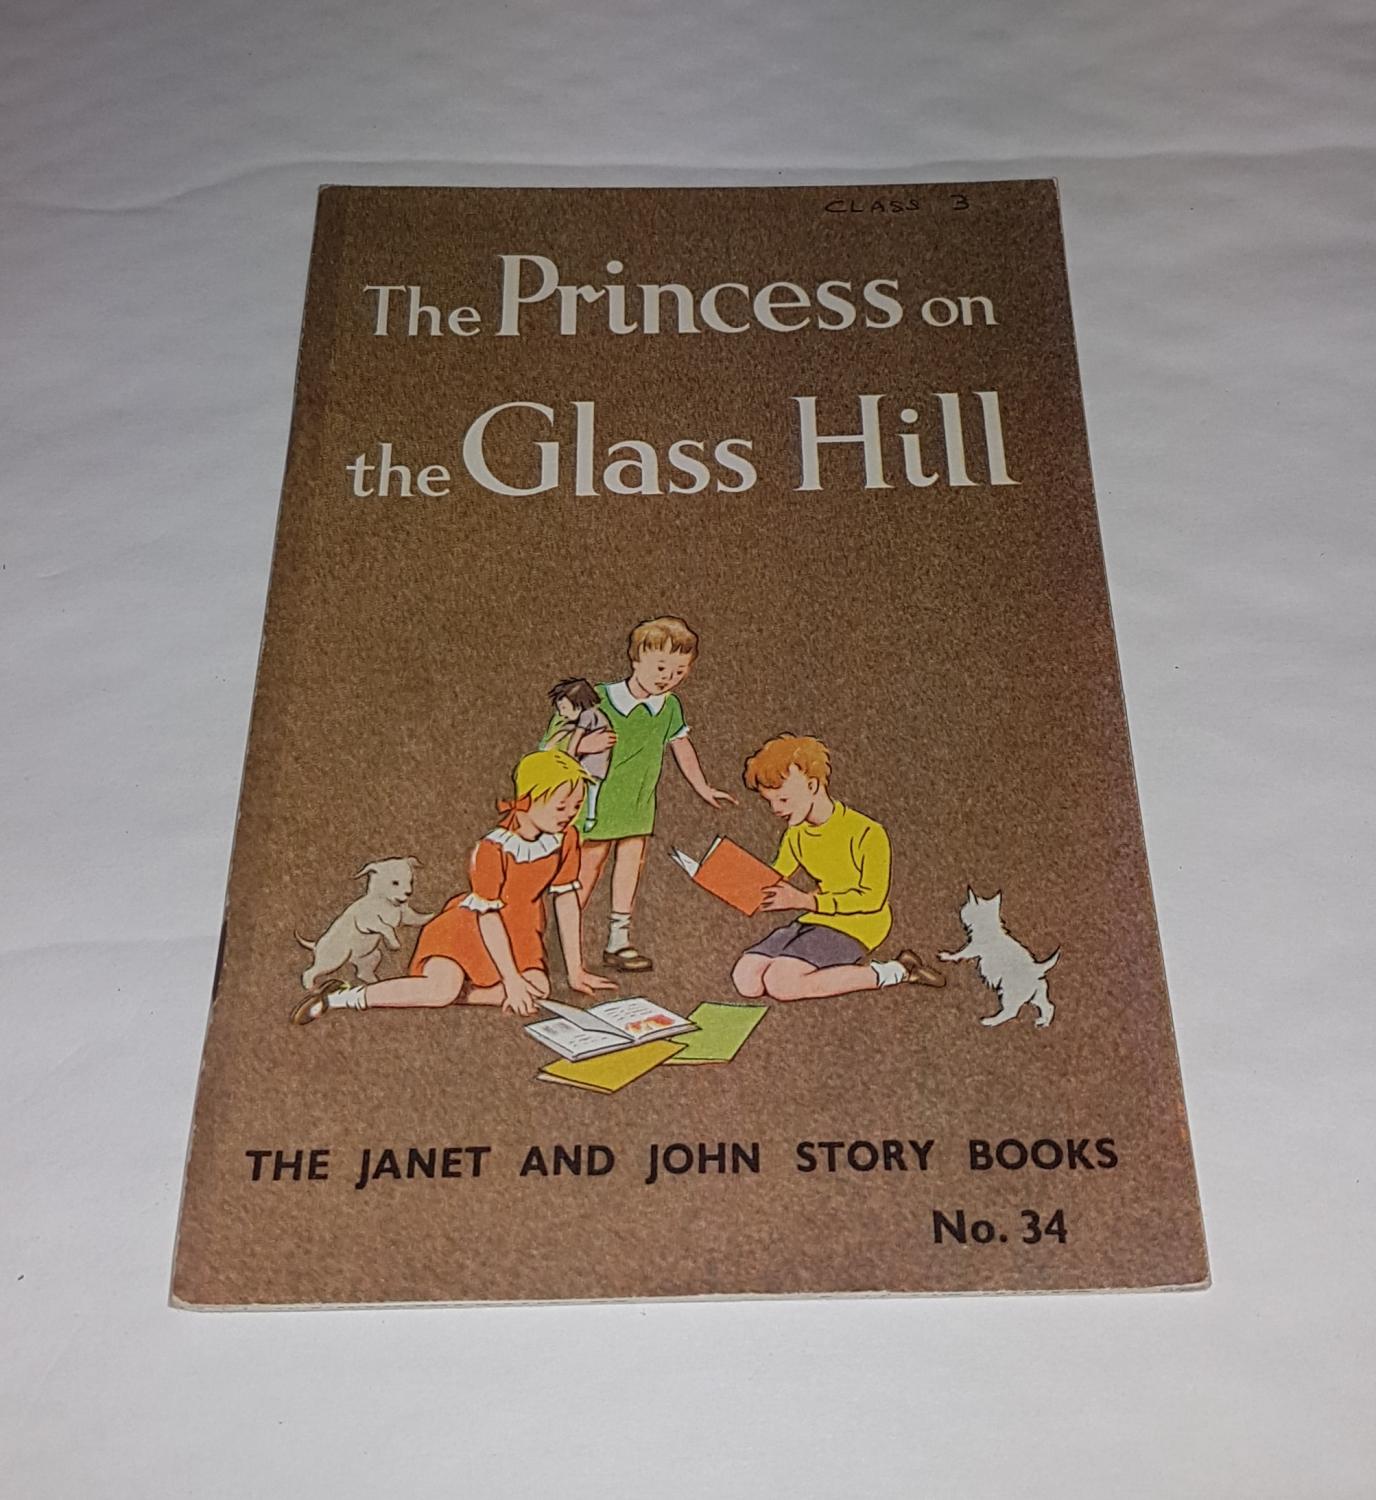 The Princess on the Glass Hill - The Janet and John Story Books No. 34 - Huber, Miriam Blanton; Salisbury, Frank Seely; O'Donnell, Mabel; Royt, Mary (illustrated); Farnam, Nellie H (illustrated)